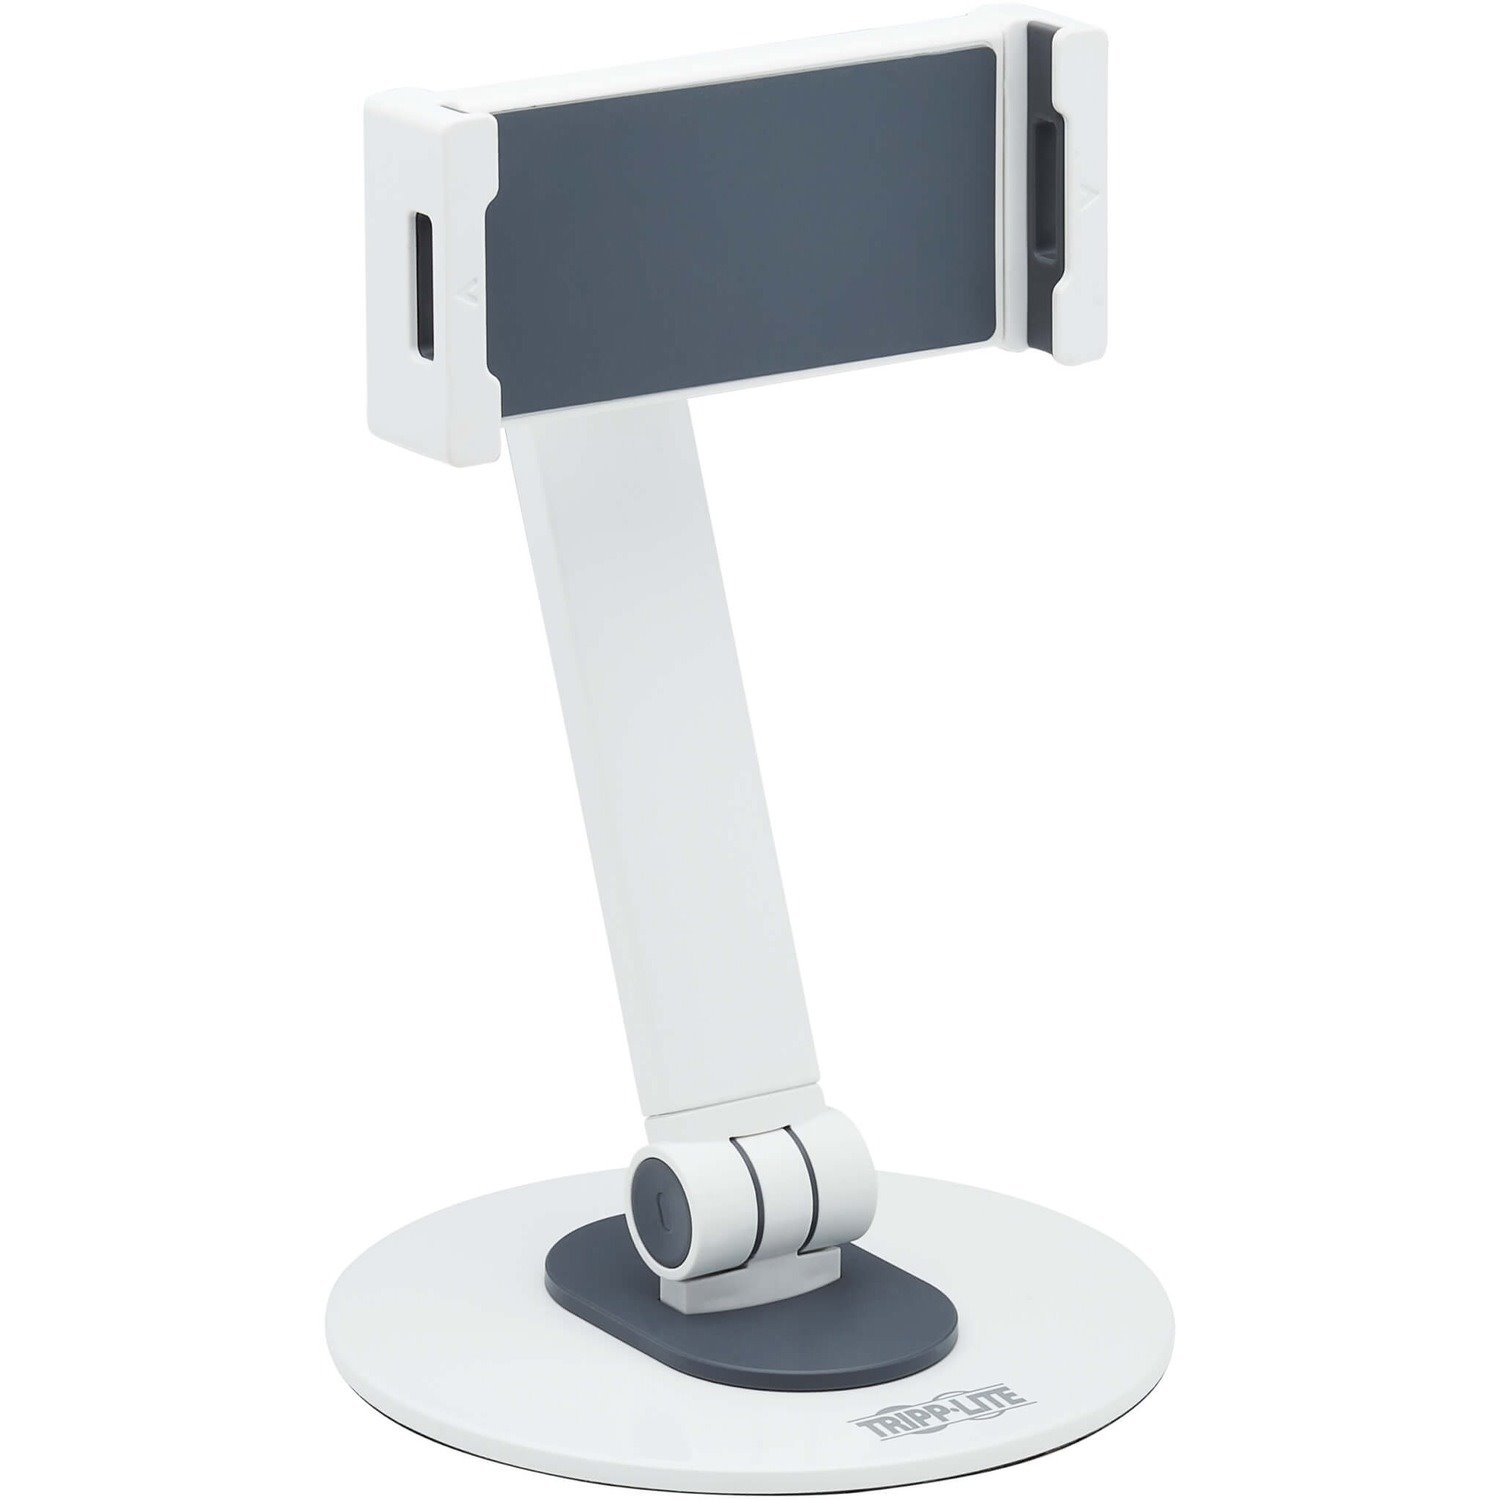 Tripp Lite by Eaton Full-Motion Smartphone and Tablet Desktop Mount, White